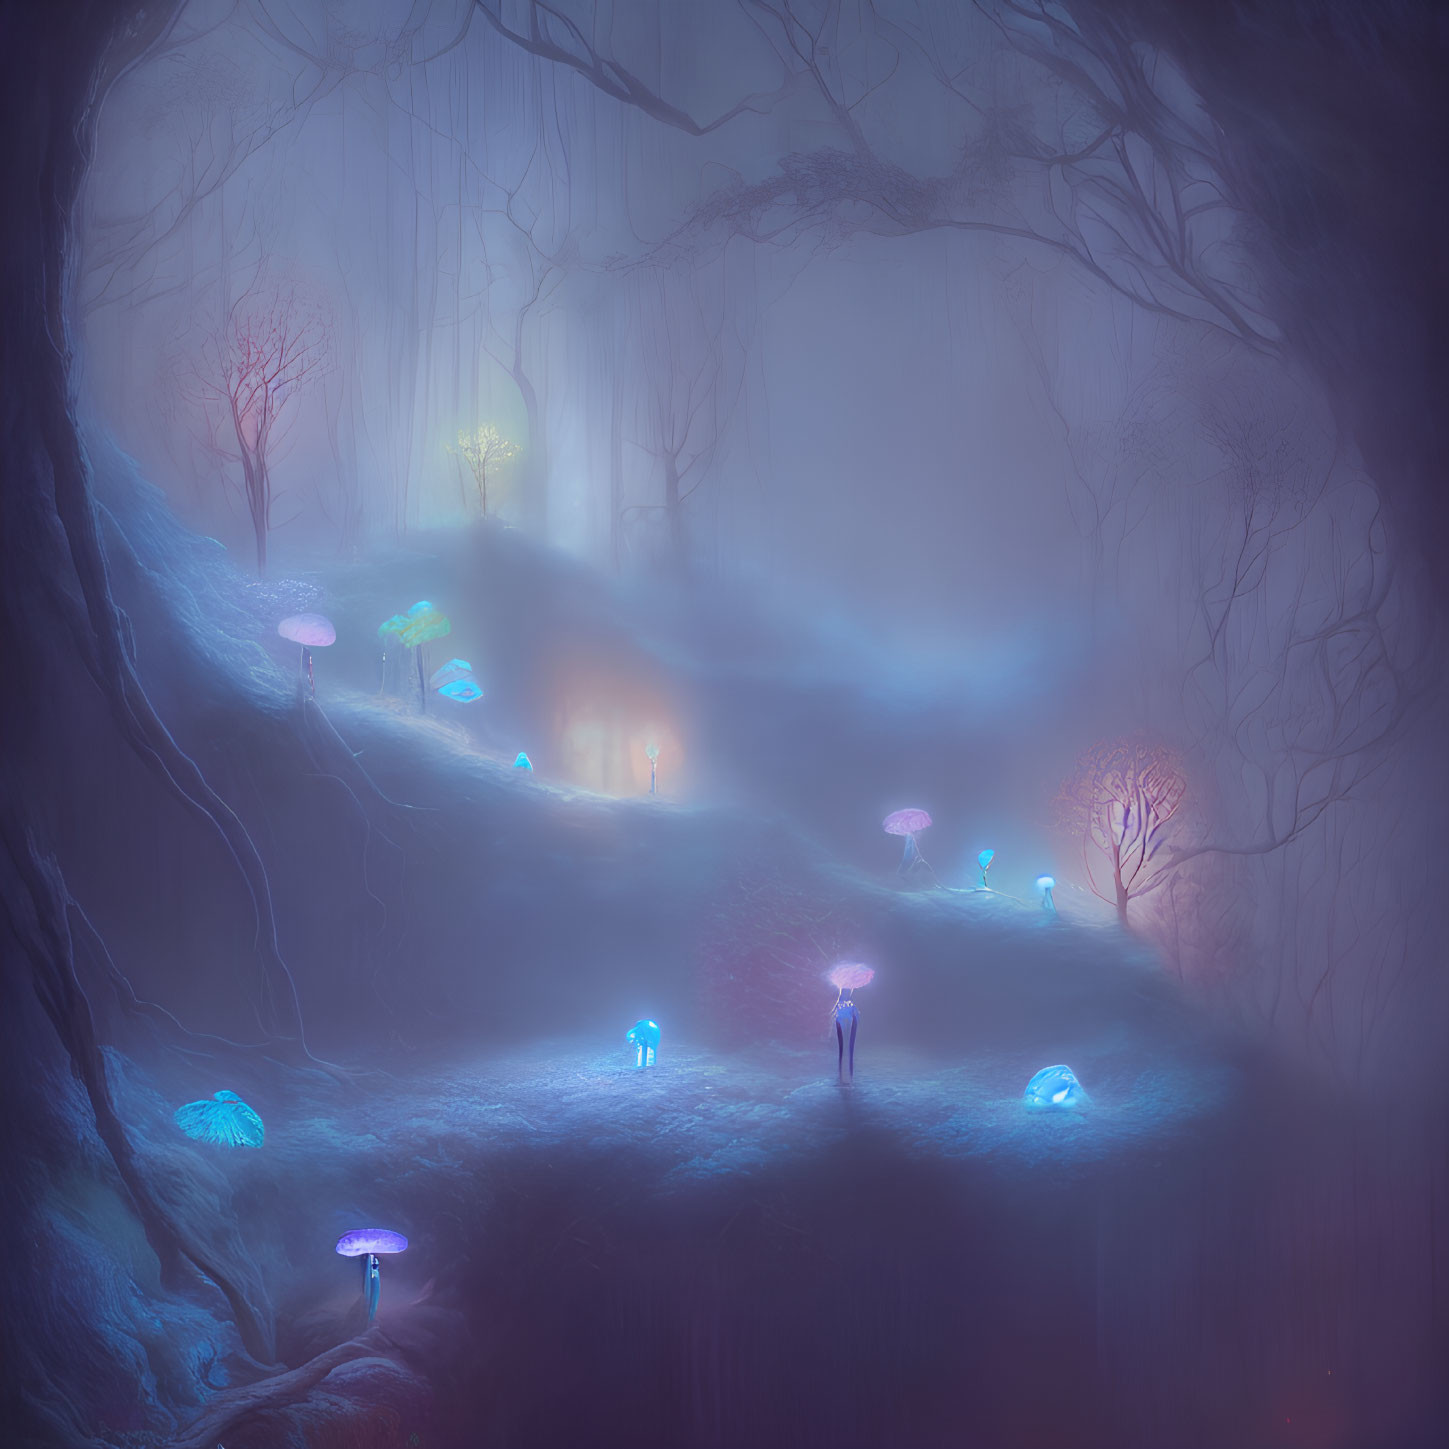 Enchanting twilight forest with glowing mushrooms and foggy ambiance